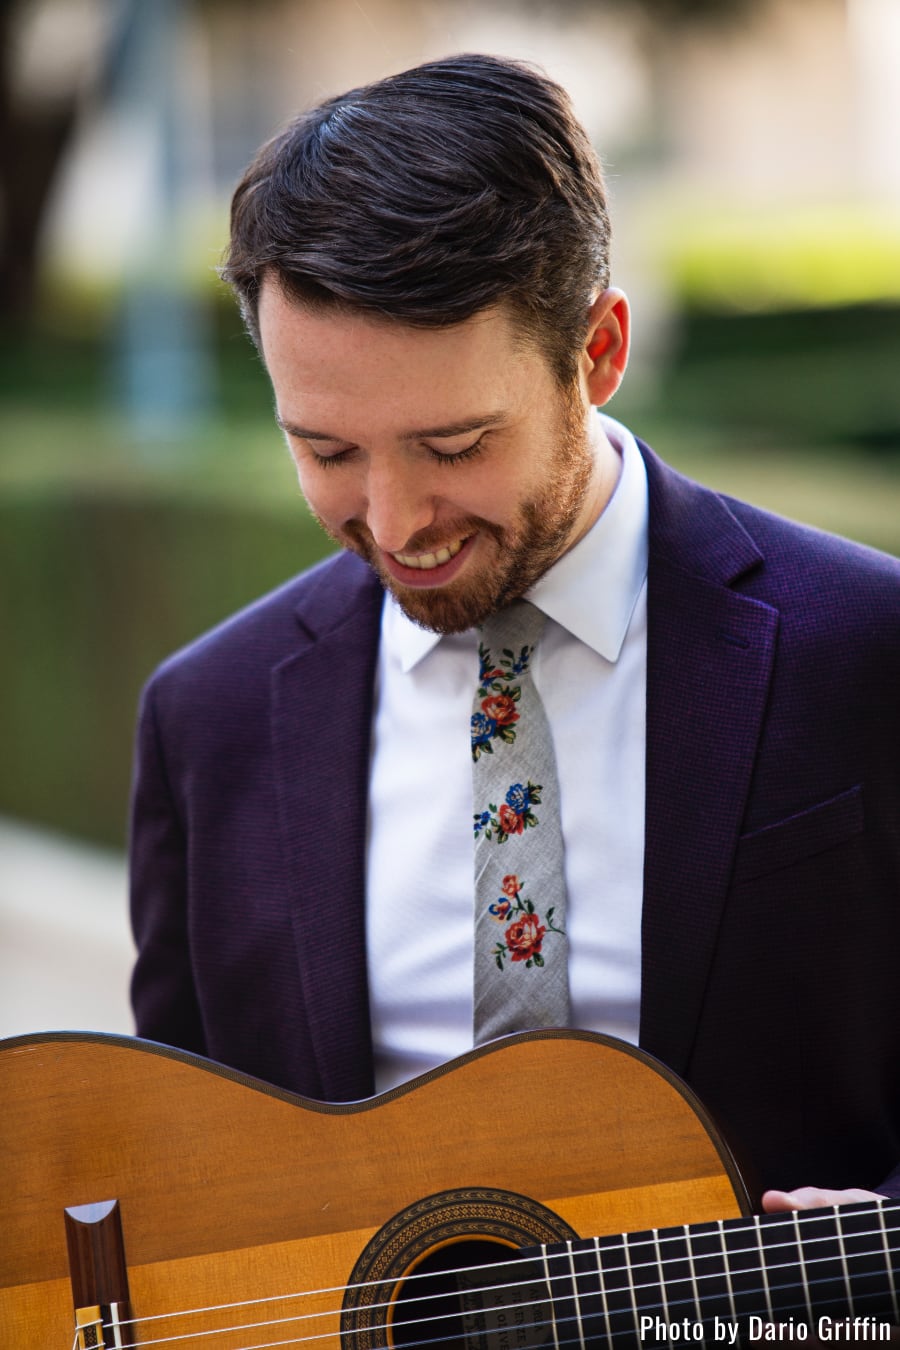 Musician Colin Davin smiling while looking down at his guitar; photo courtesy Dario Griffin